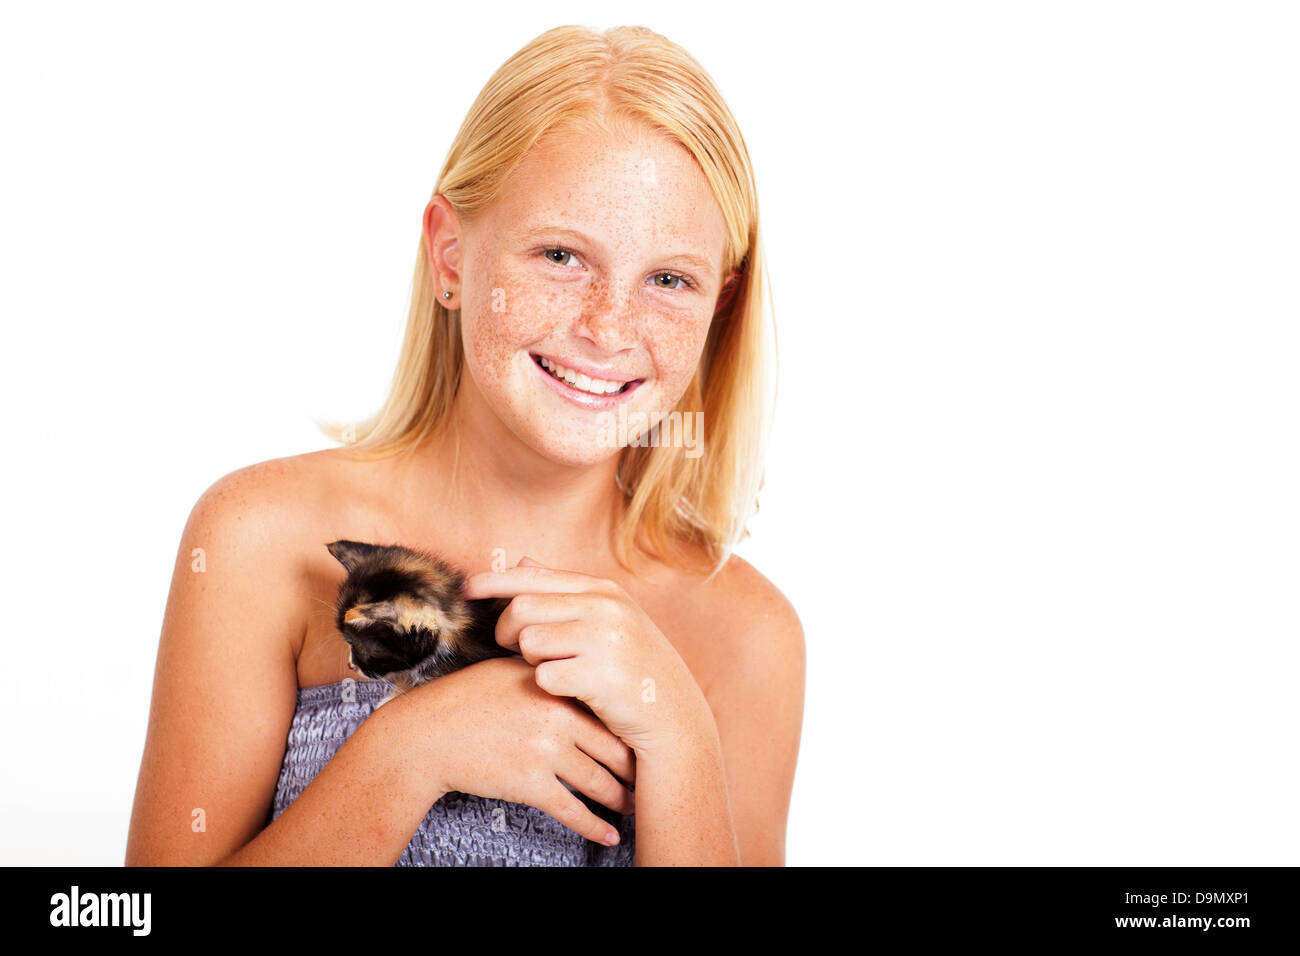 cute little girl with freckles holding a kitten Stock Photo